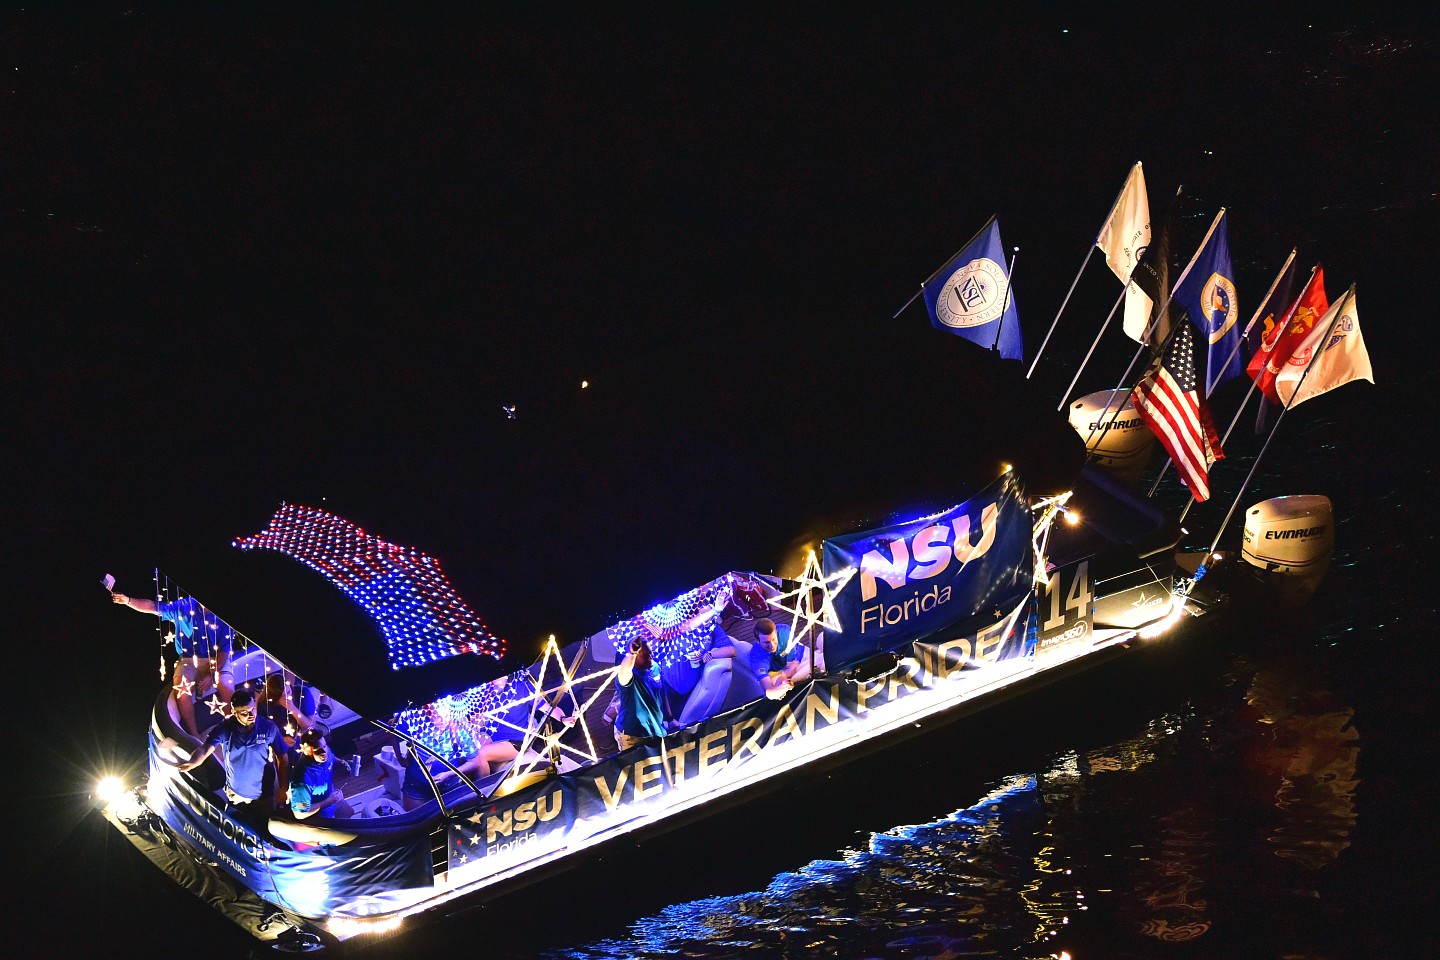 NSU Student Veterans on board Starmarker, boat number 14 in the 2021 Winterfest Boat Parade